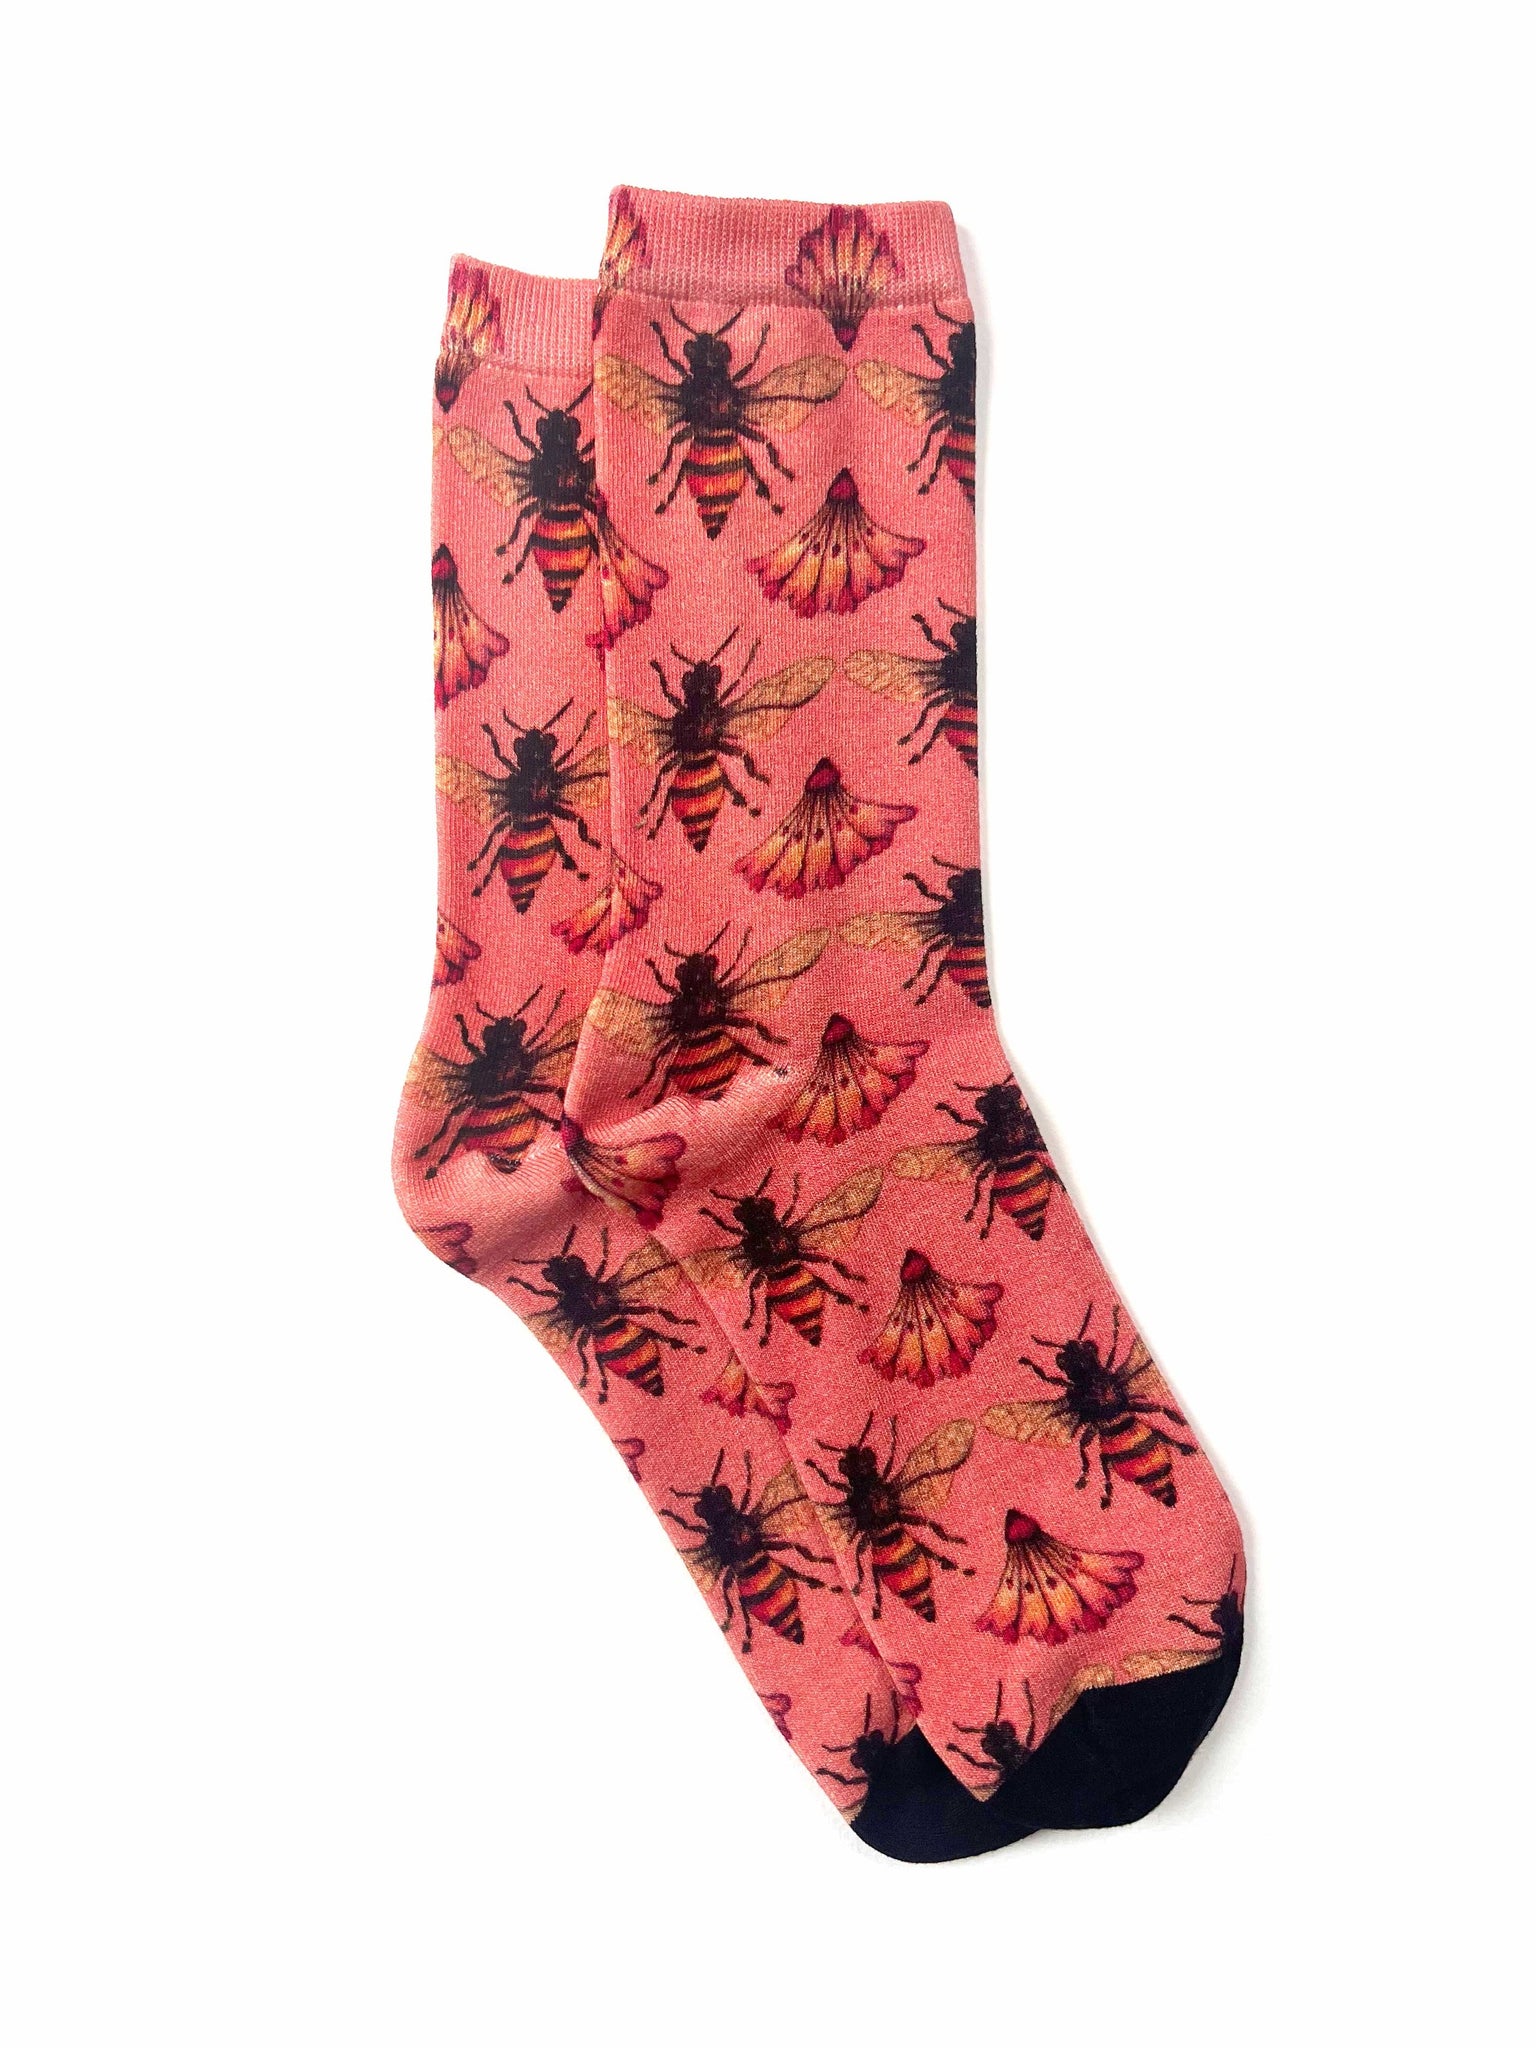 Strathcona - Bamboo Socks in Nouveau Bumble Bee